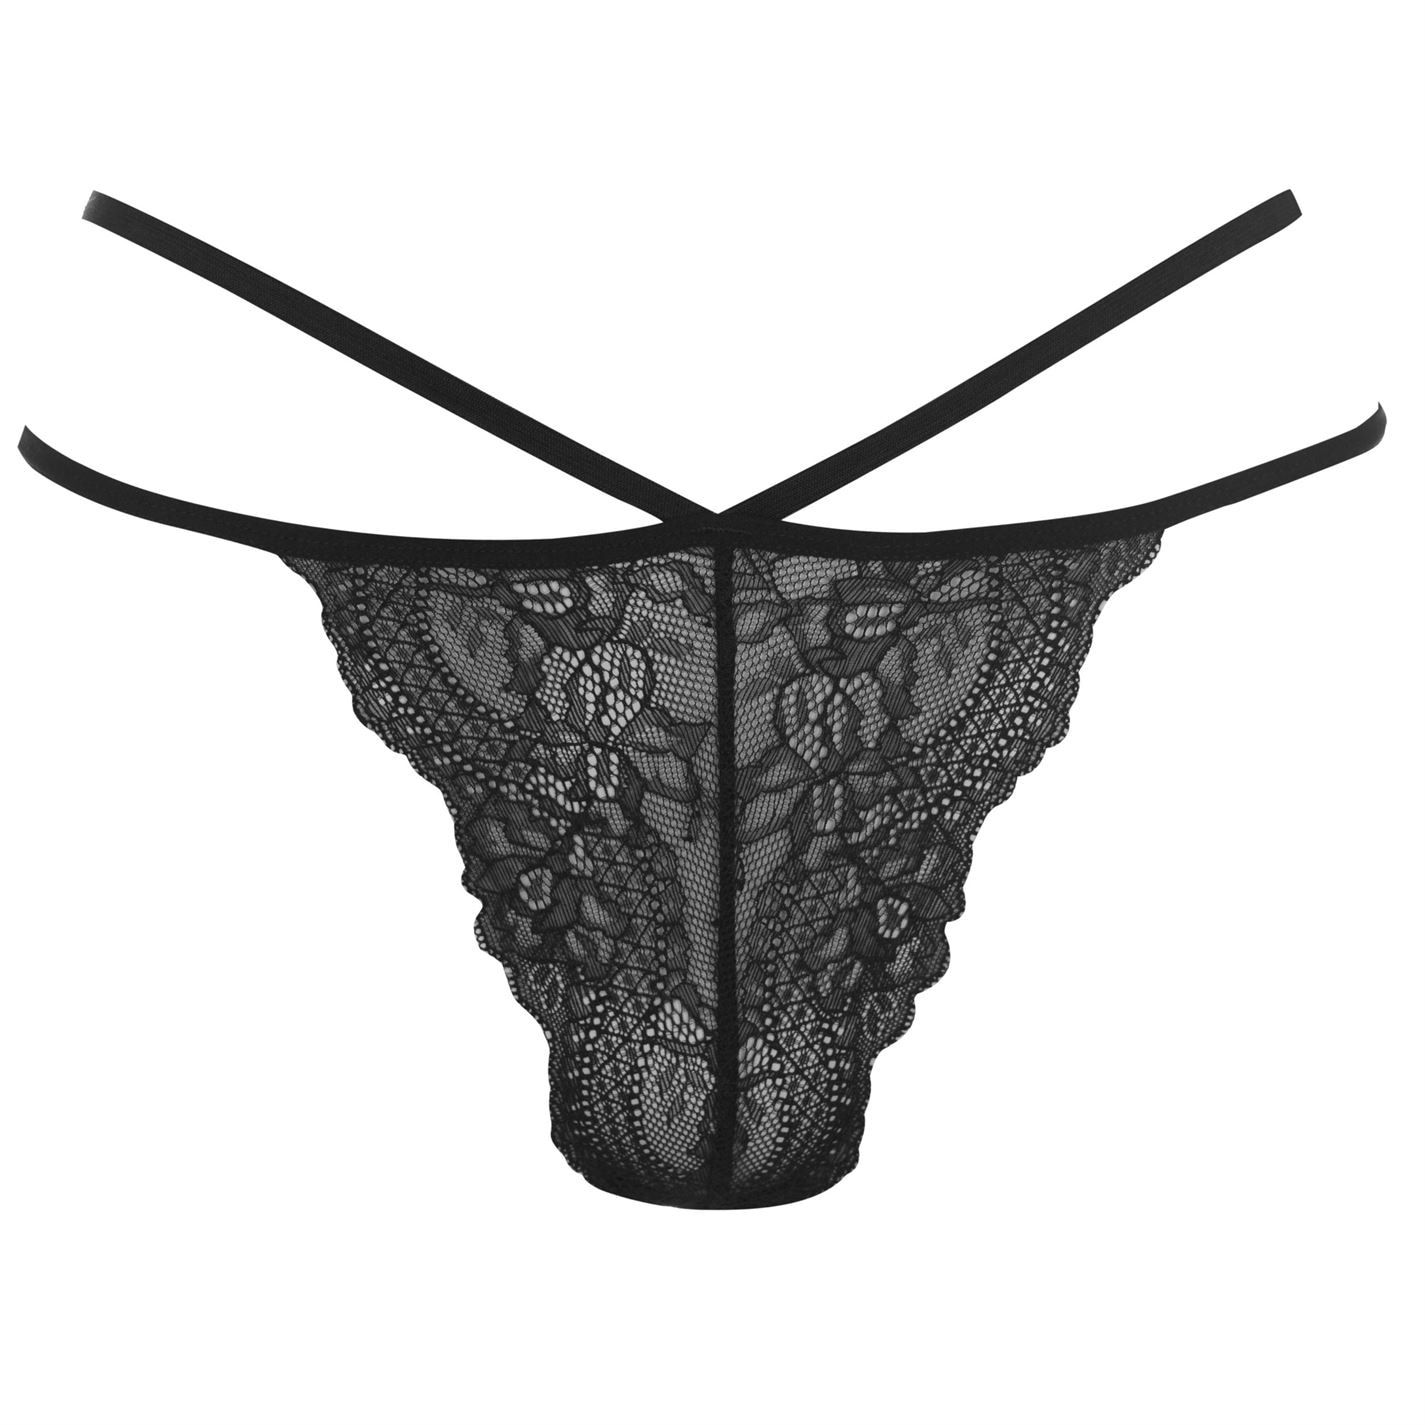 <strong> Firetrap Thong Briefs Ladies </strong><br><br> These Firetrap Thong Briefs are crafted with an elasticated waistband made up of 2 straps. They feature a lace body and are a lightweight construction. These thongs are a block colour design and are complete with Firetrap branding. <br>> Underwear<br>> Thongs<br>> Elasticated waistband<br>> Double straps<br>> Lace body<br>> Lightweight<br>> Block colour<br>> Firetrap branding<br>> 90% polyamide, 10% elastane<br>> Machine washable<br>> Keep away from fire